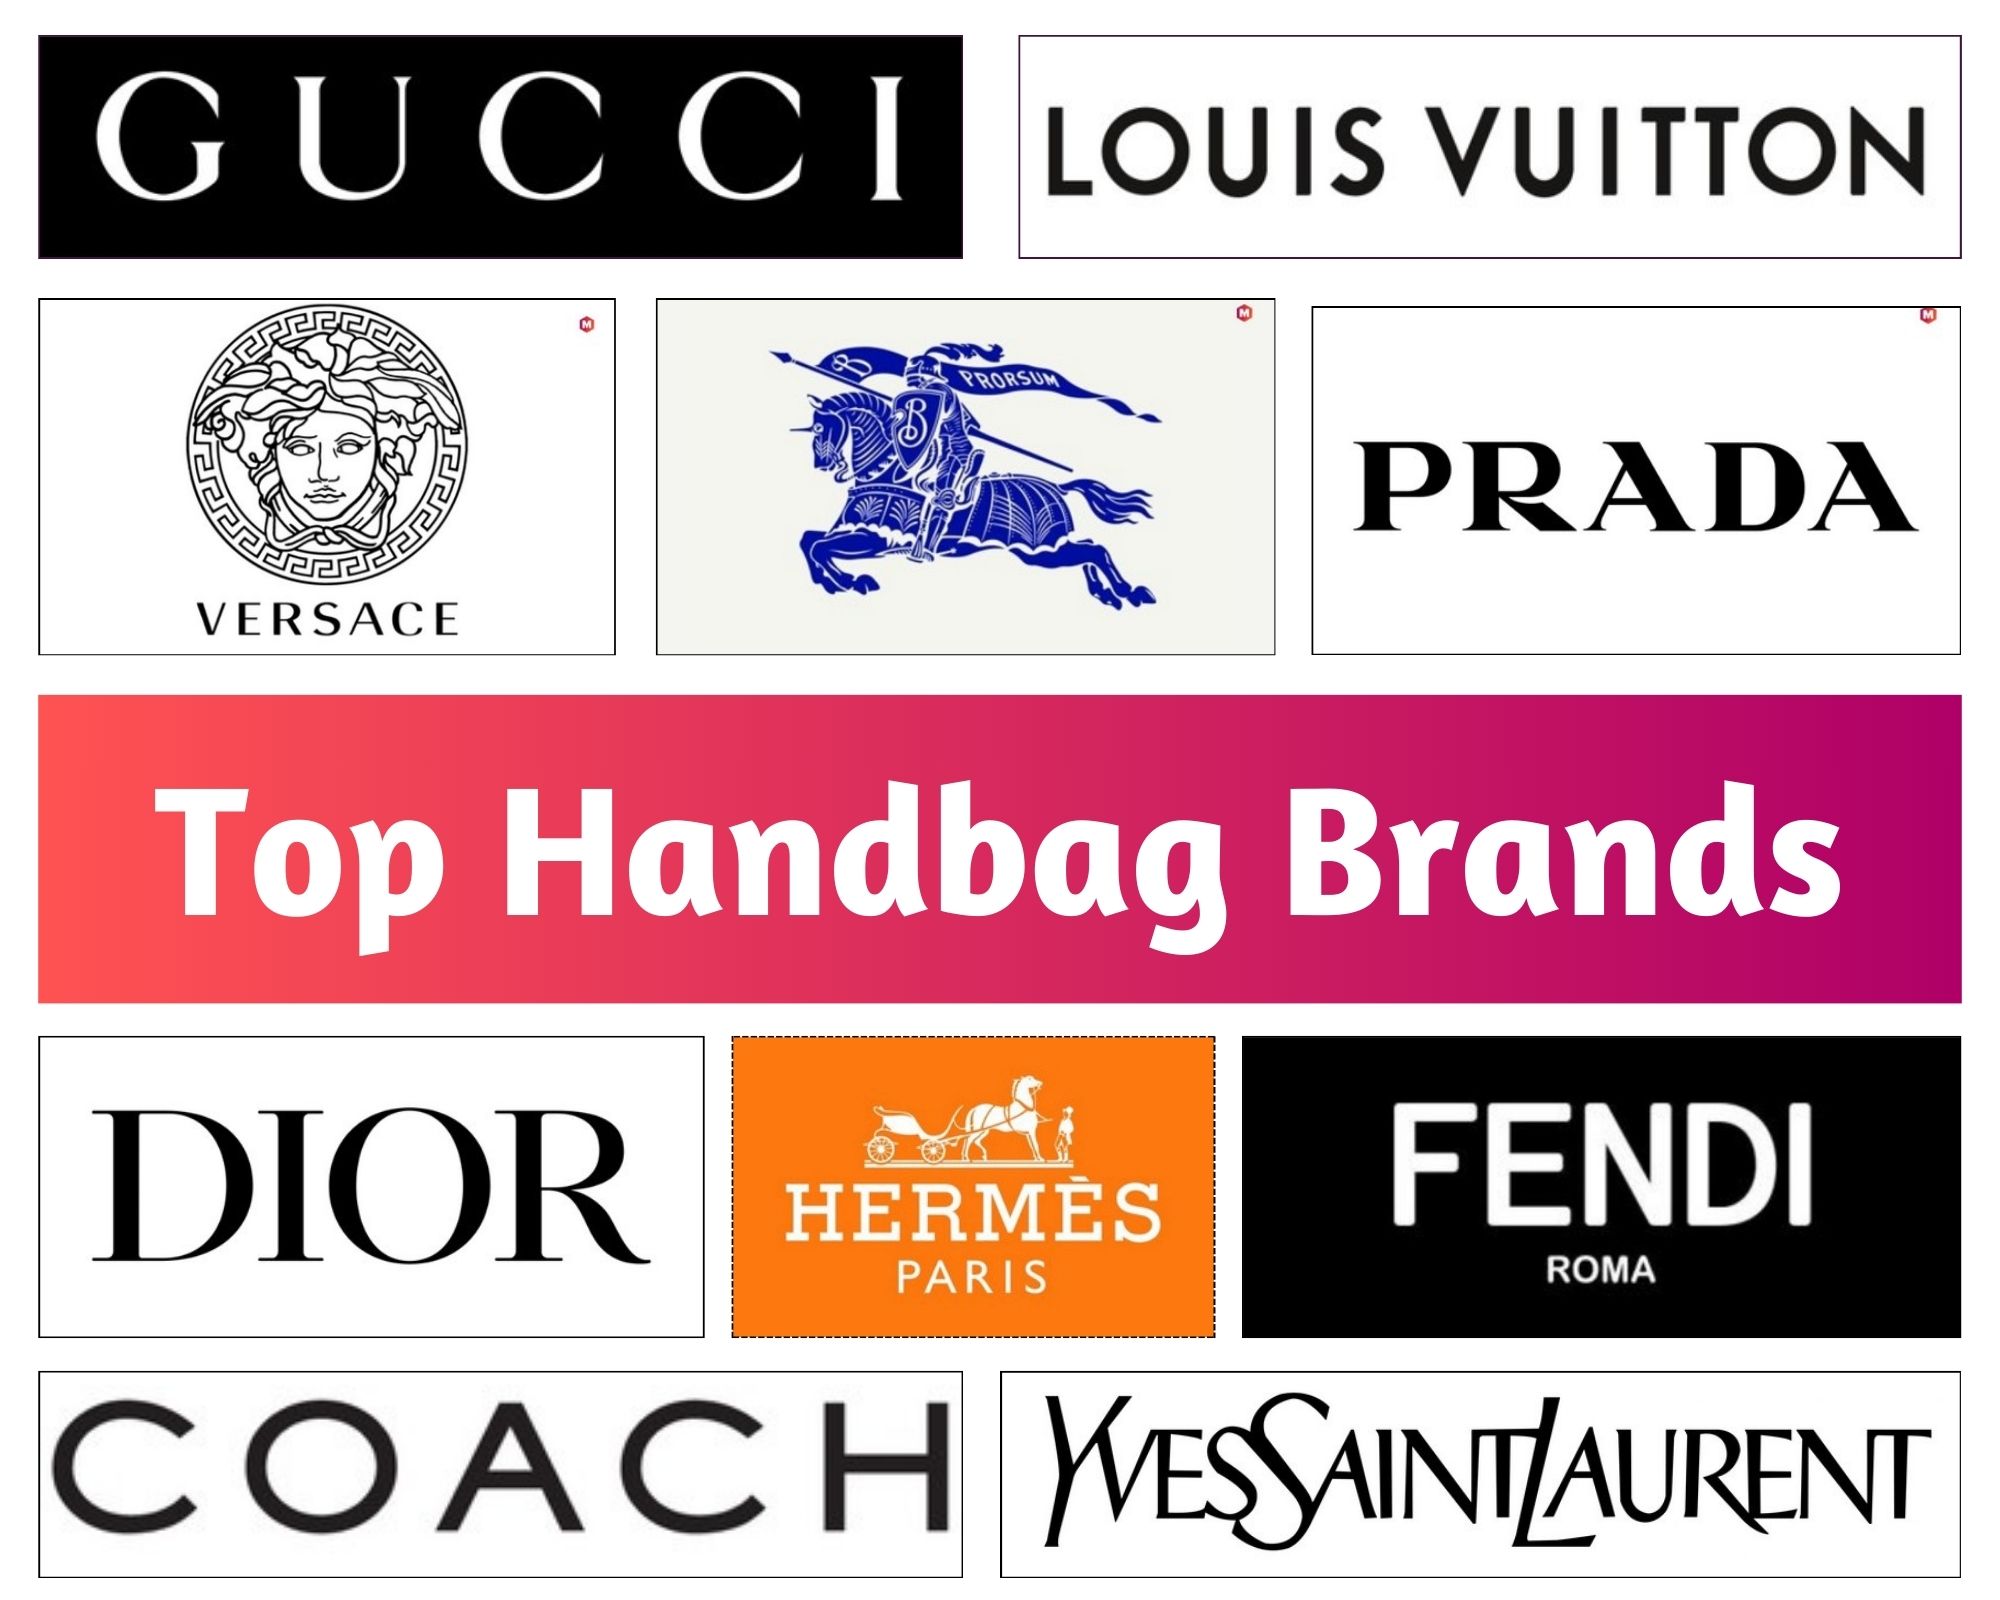 What are some popular fashion brands for luxury handbags? - Quora